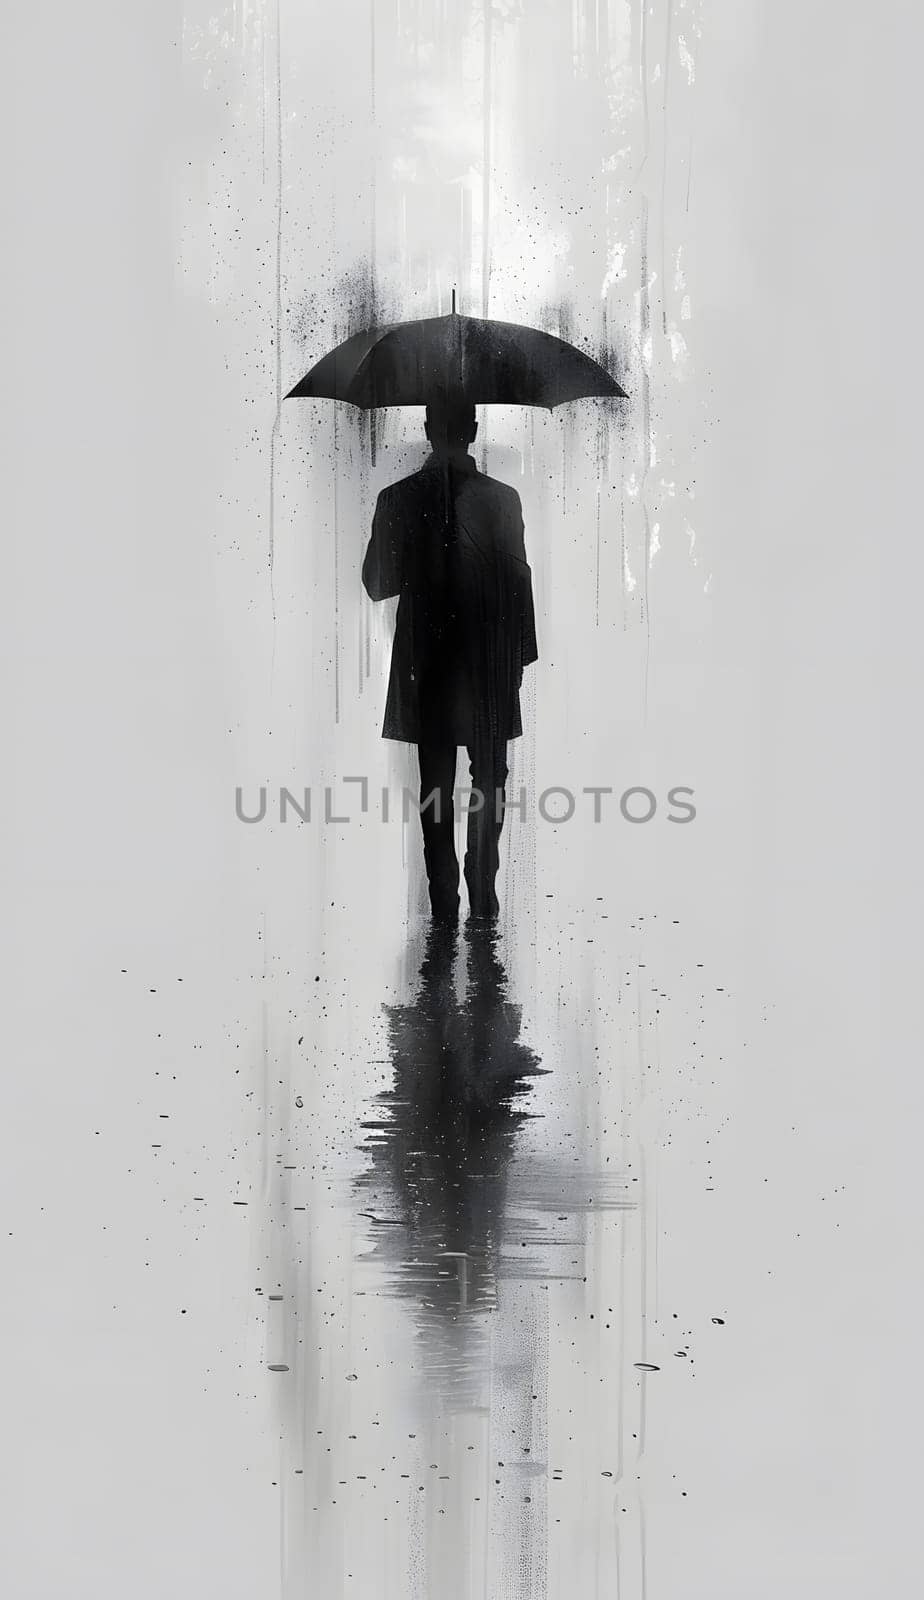 a man is walking in the rain with an umbrella by Nadtochiy